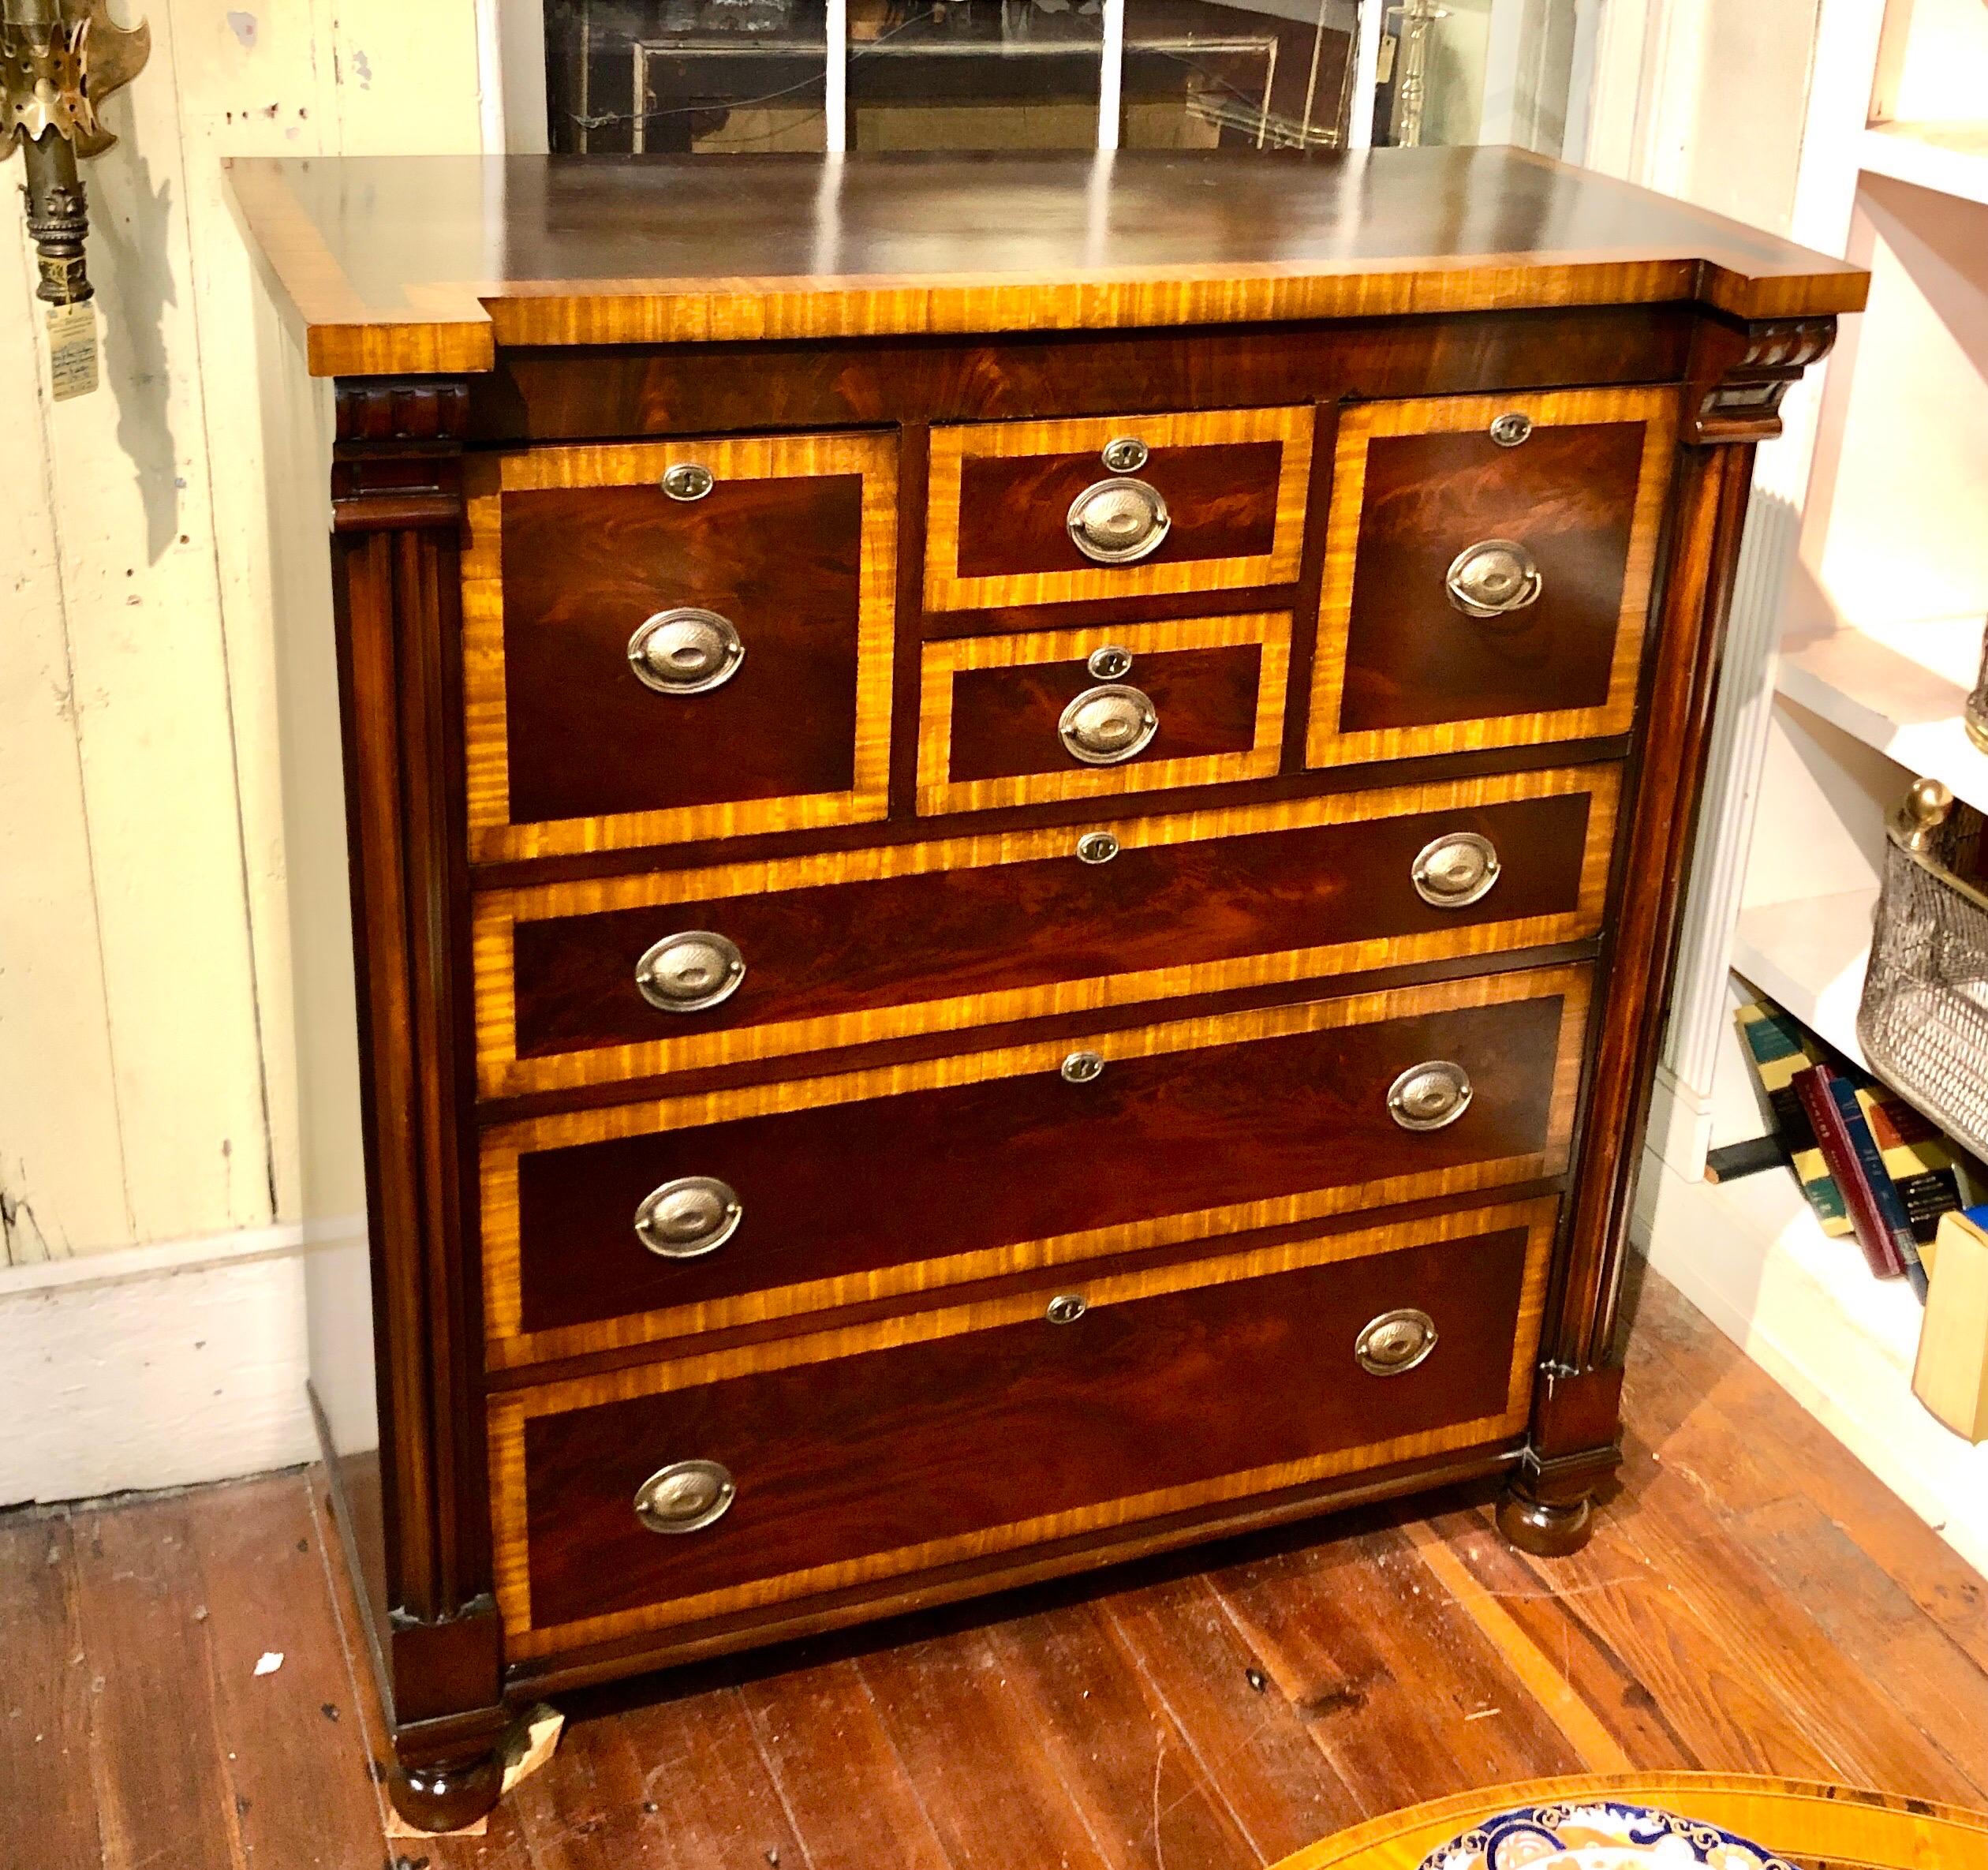 This extraordinary Antique Scottish early to mid 19th century chest of drawers is wonderful and typical of the multi-drawer configuration with large column-like baluster ends terminating in bunn feet. The chest is in remarkable, age-appropriate